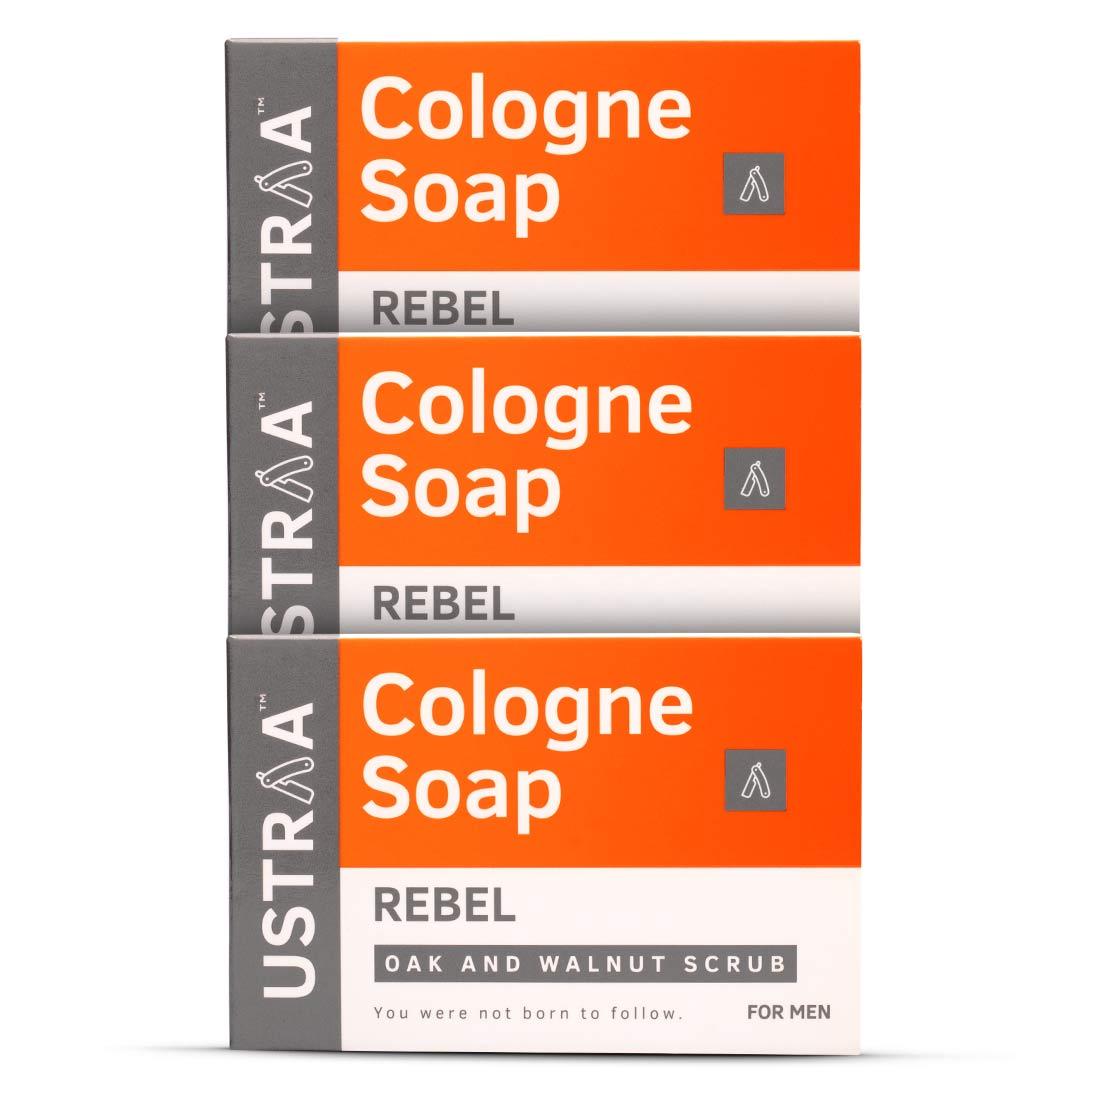 The Best Scrubbing Rebel Cologne Soap Helps in Deeper Cleaning and Removal of Dirt with Long Lasting Fragrance